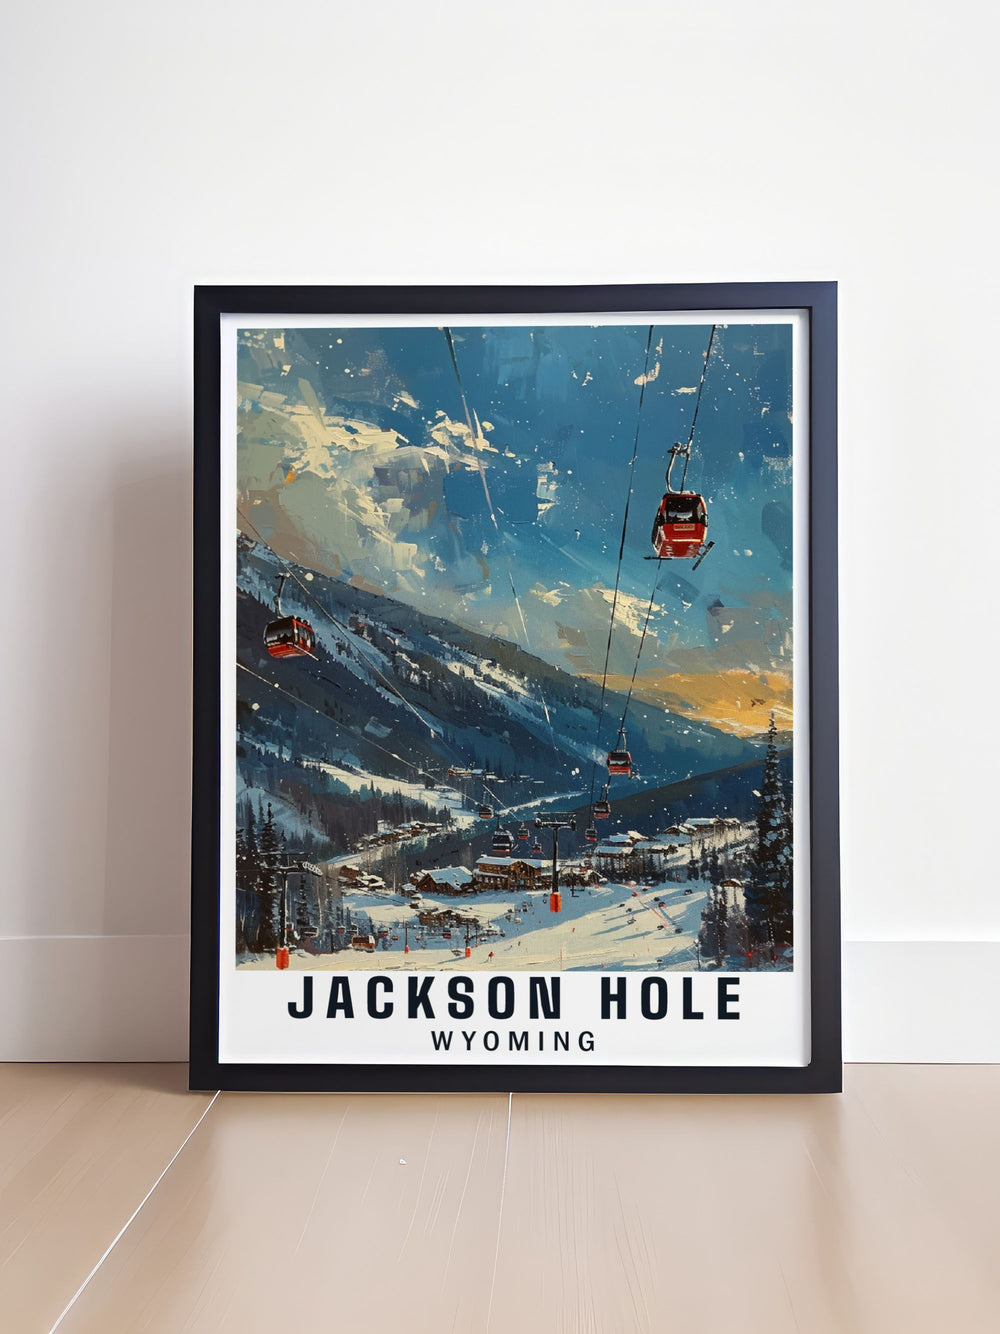 Featuring Jackson Holes majestic terrain and the renowned Mountain Resort, this poster brings the essence of Wyomings natural beauty into your living space.